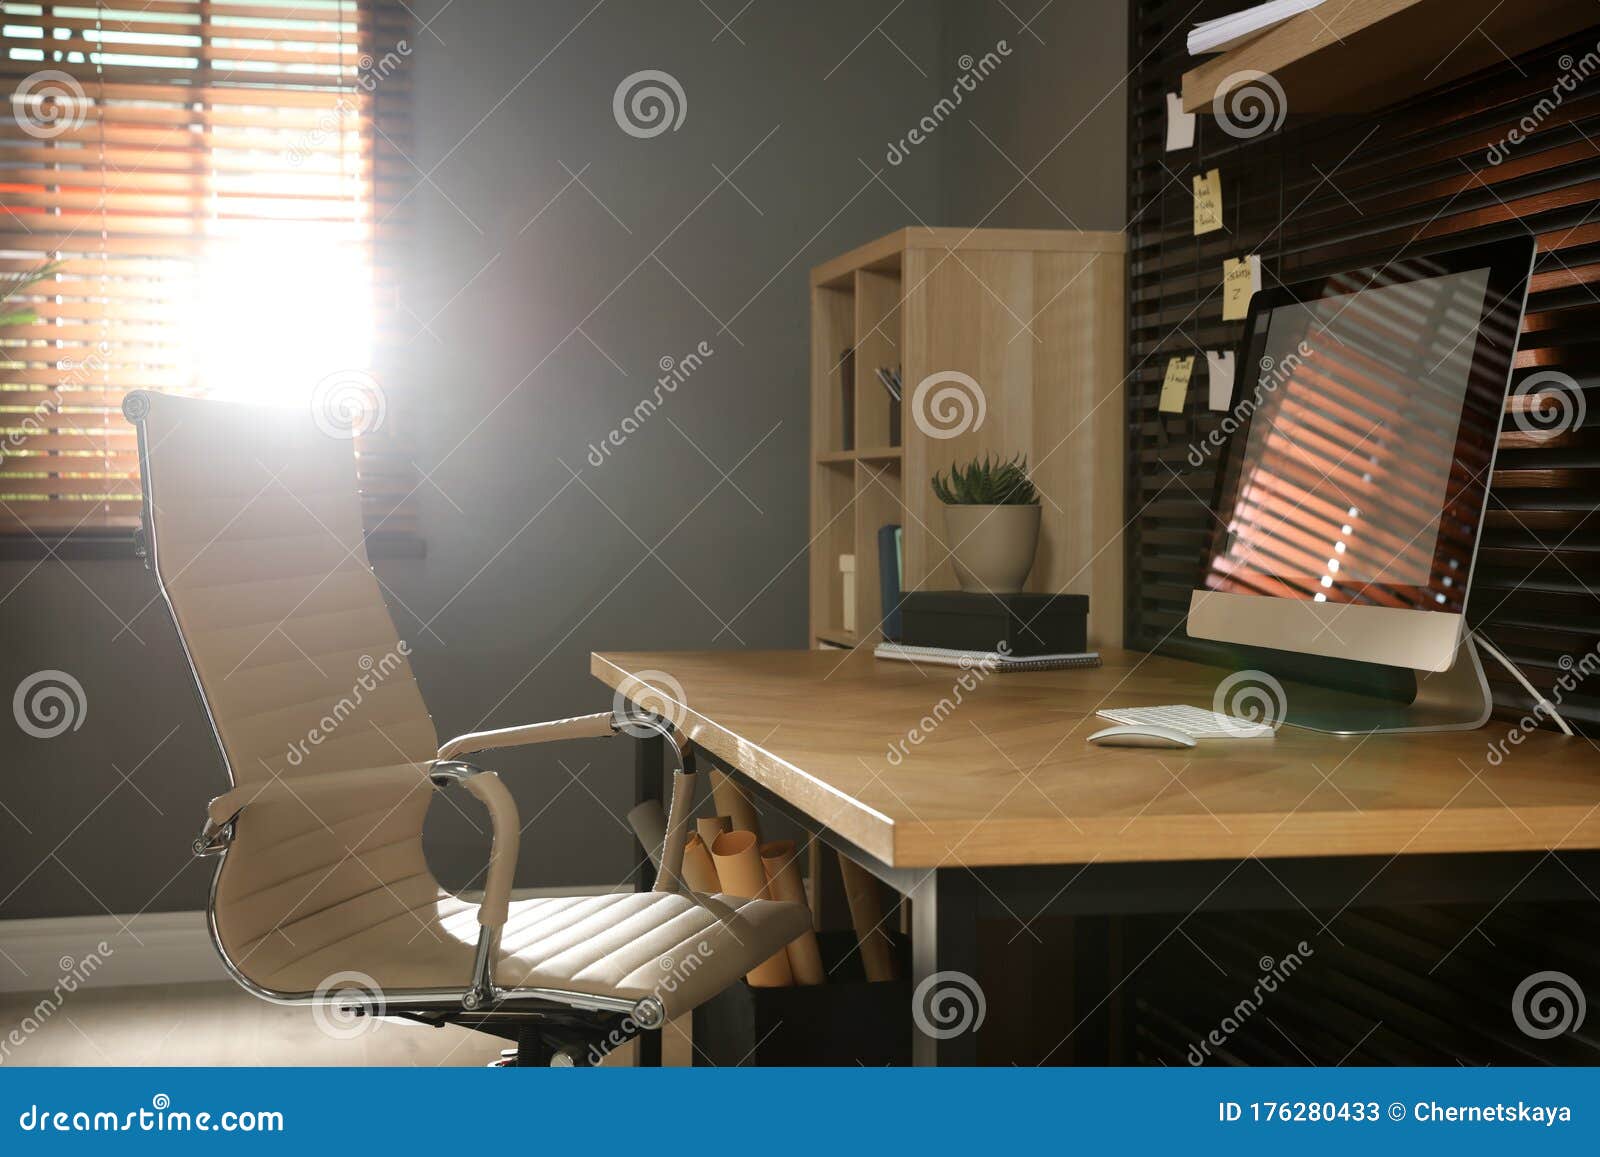 Comfortable Workplace with Office Chair and Computer on Table Stock ...